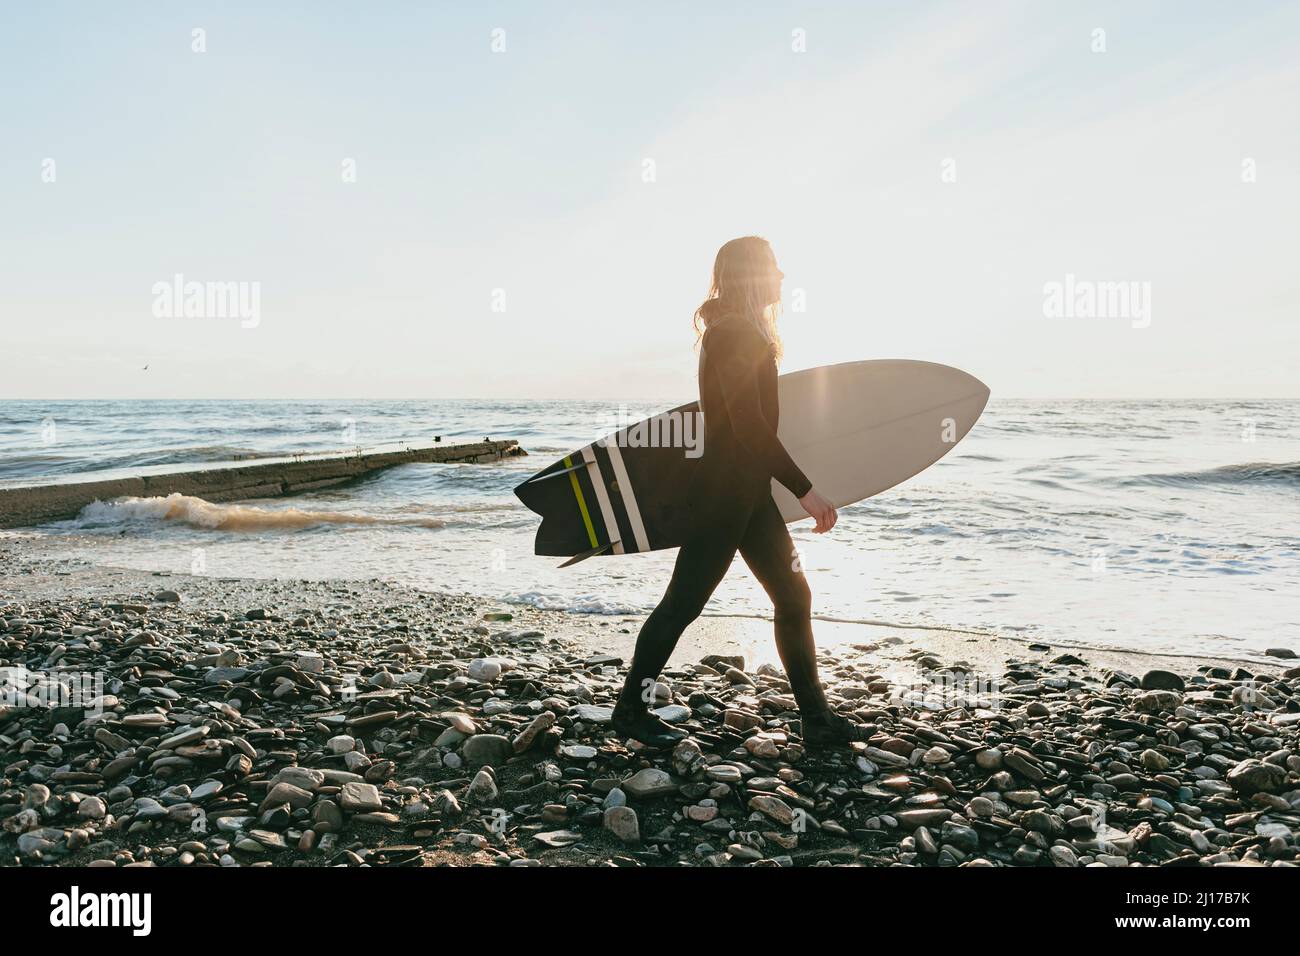 Surfer with surfboard walking on beach Stock Photo